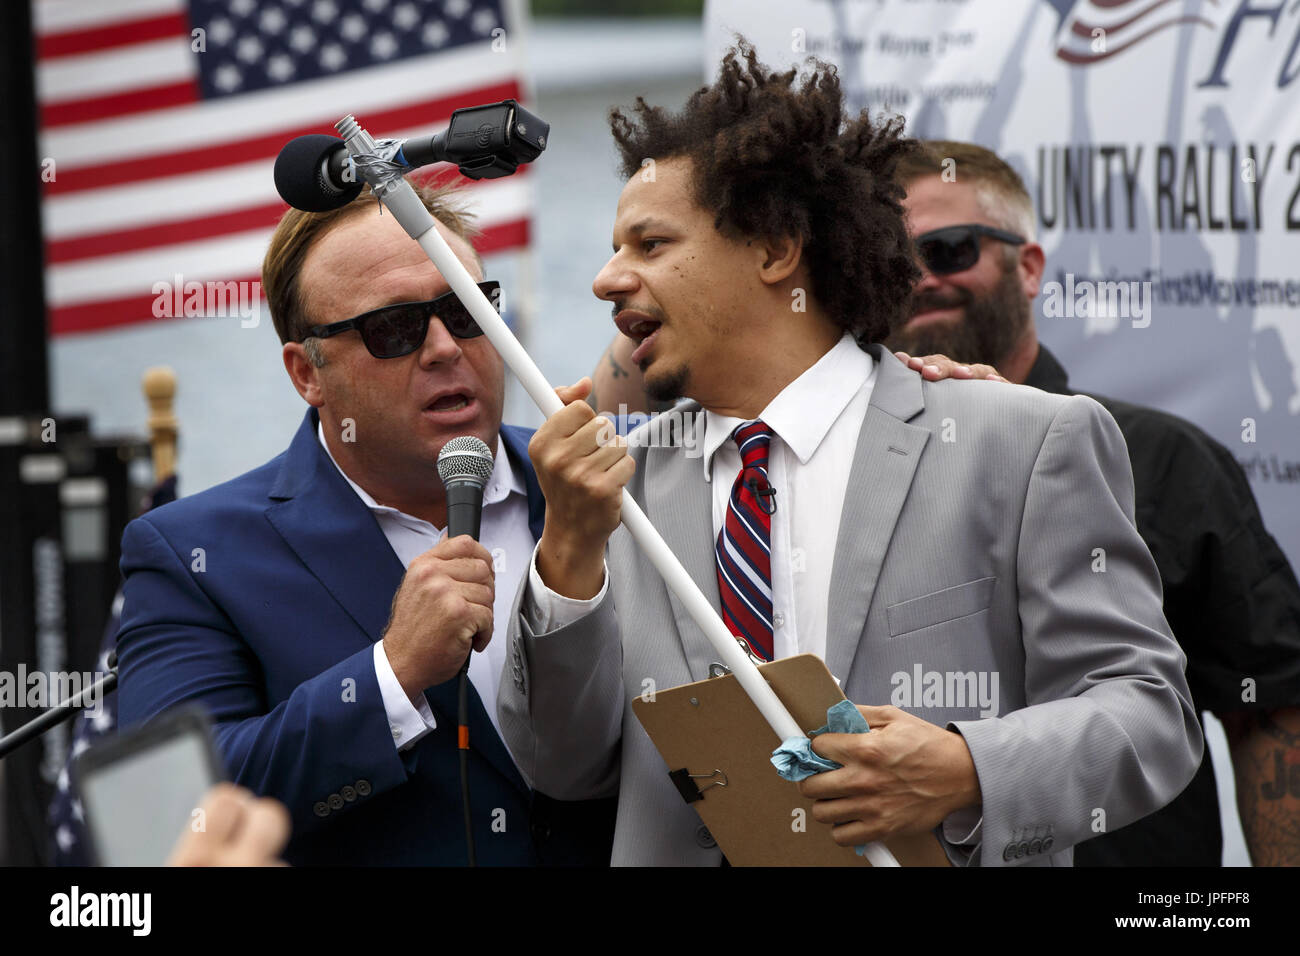 July 18, 2016 - Cleveland, Ohio, U.S. - Comedian ERIC ANDRE talks with with  Infowars show host ALEX JONES during the America First Unity Rally on the  sidelines of the 2016 Republican